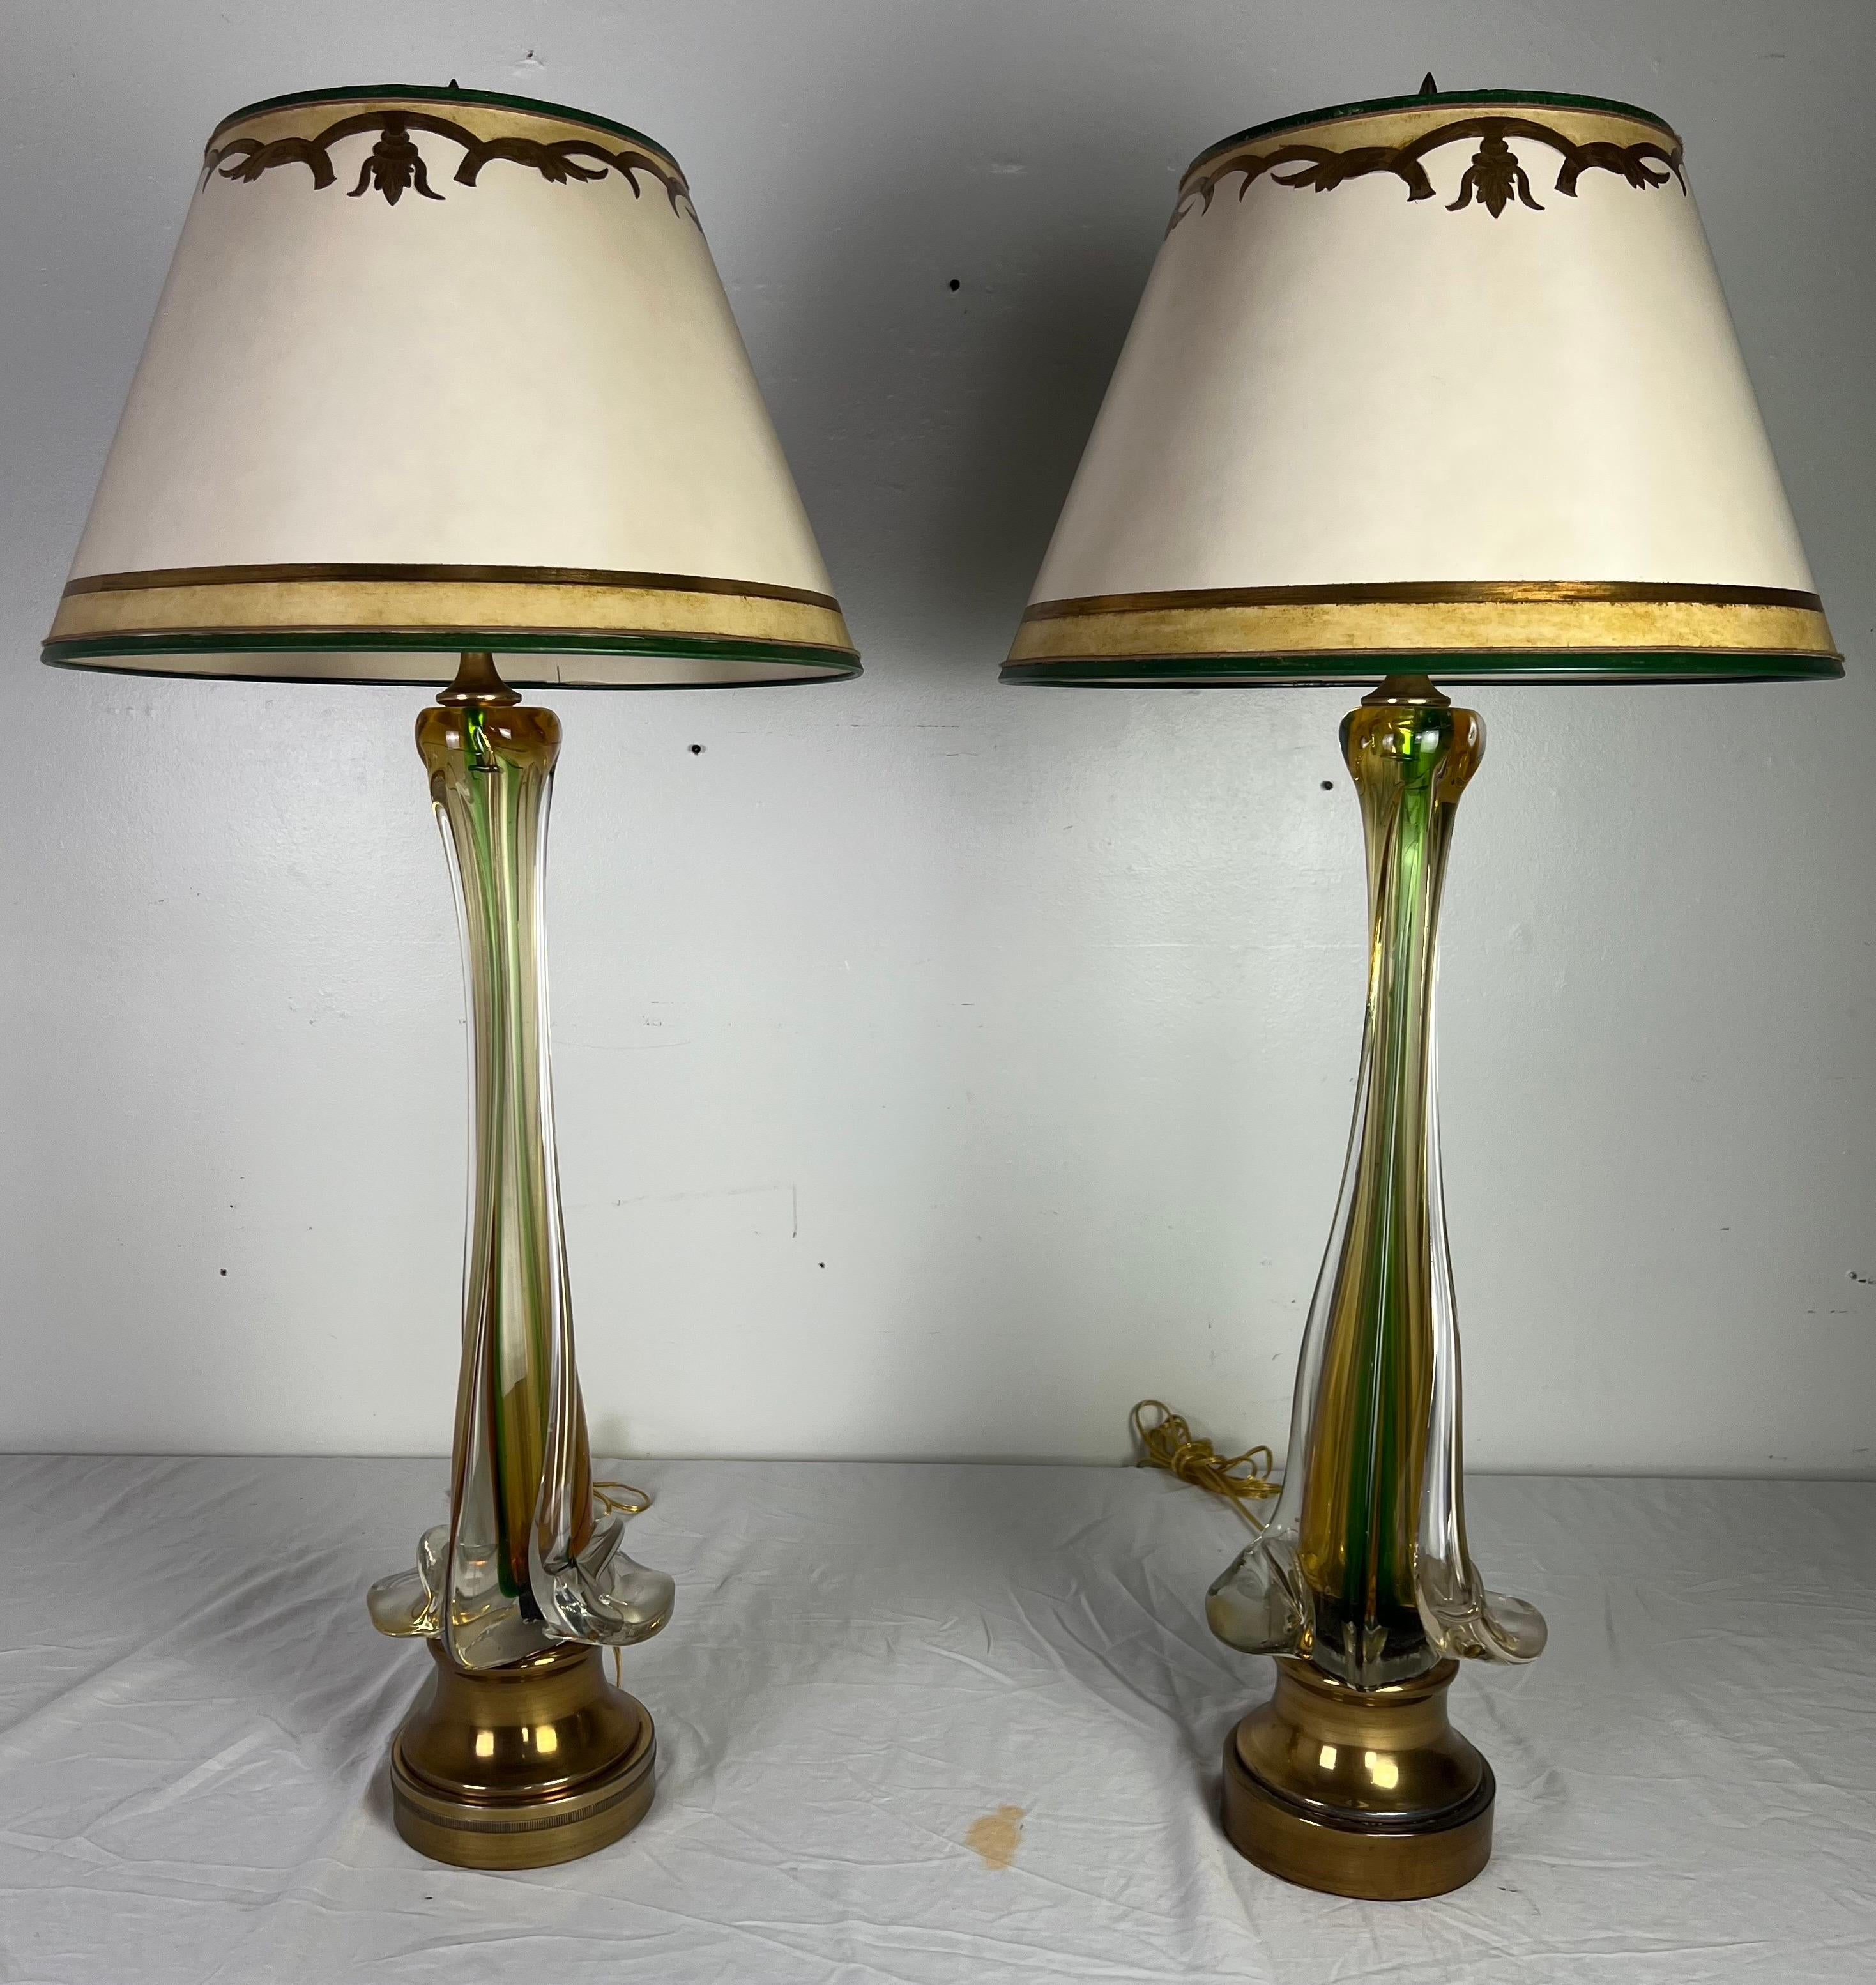 Pair of 20th century Italian Art Glass lamps with custom hand painted parchment shades.  The tall slender lamps have shades of green and gold and stand on brass bases.  